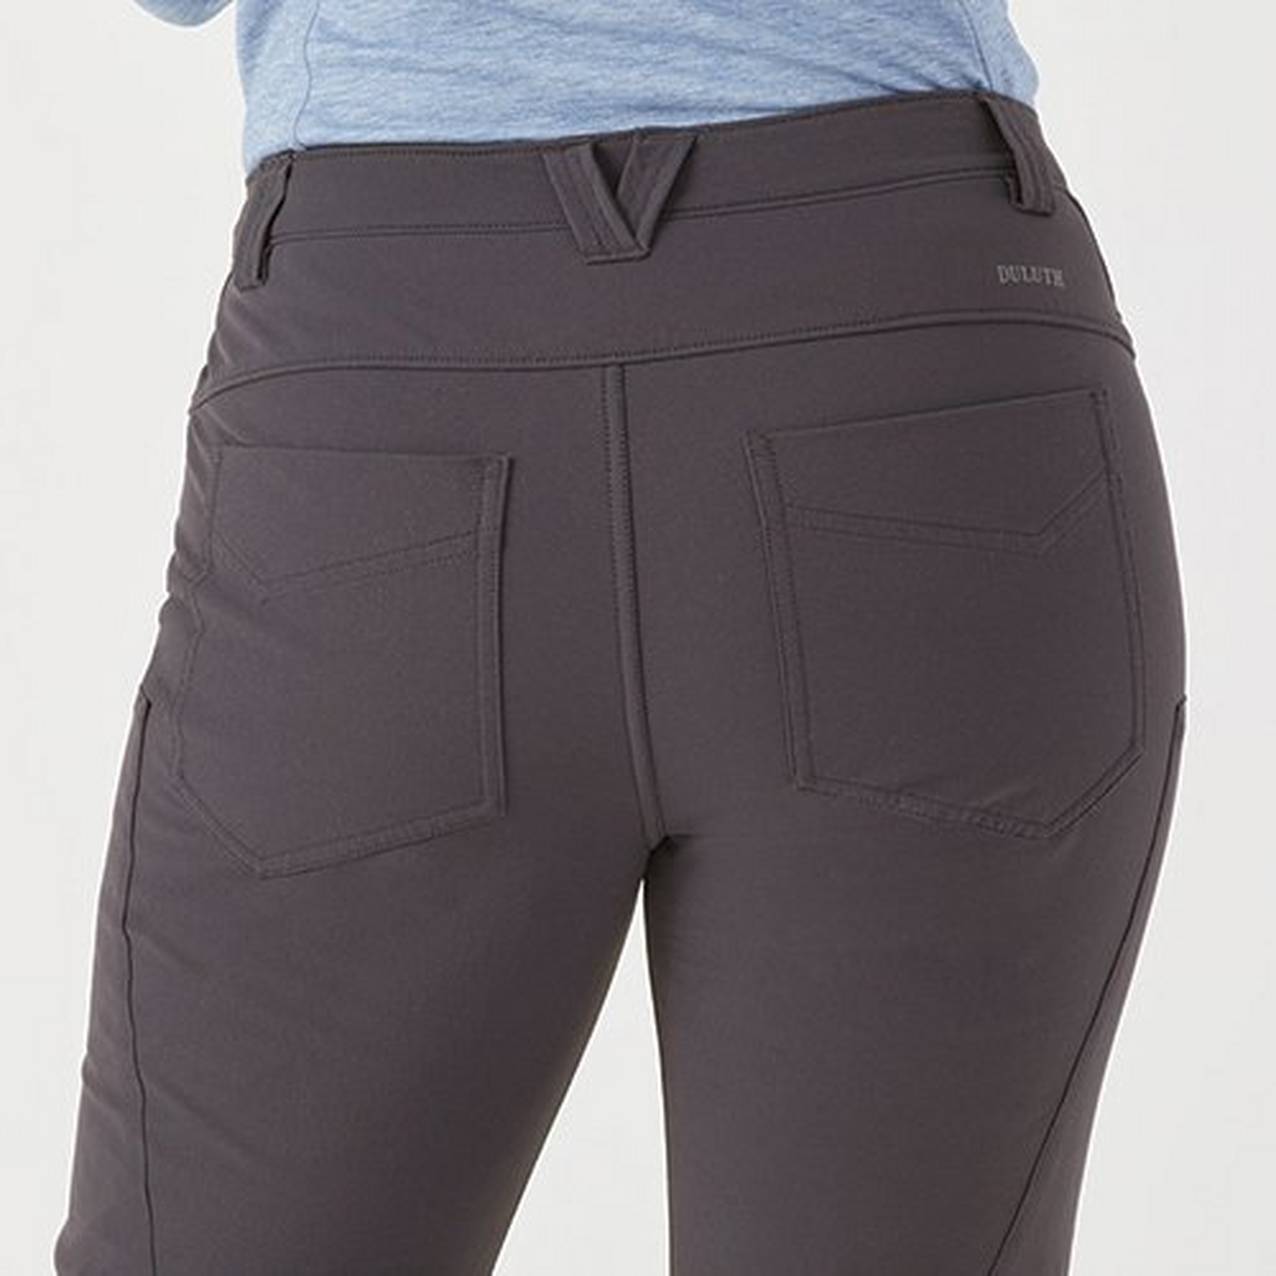 Close up of the back of a pair of pants with a v-shaped belt loop